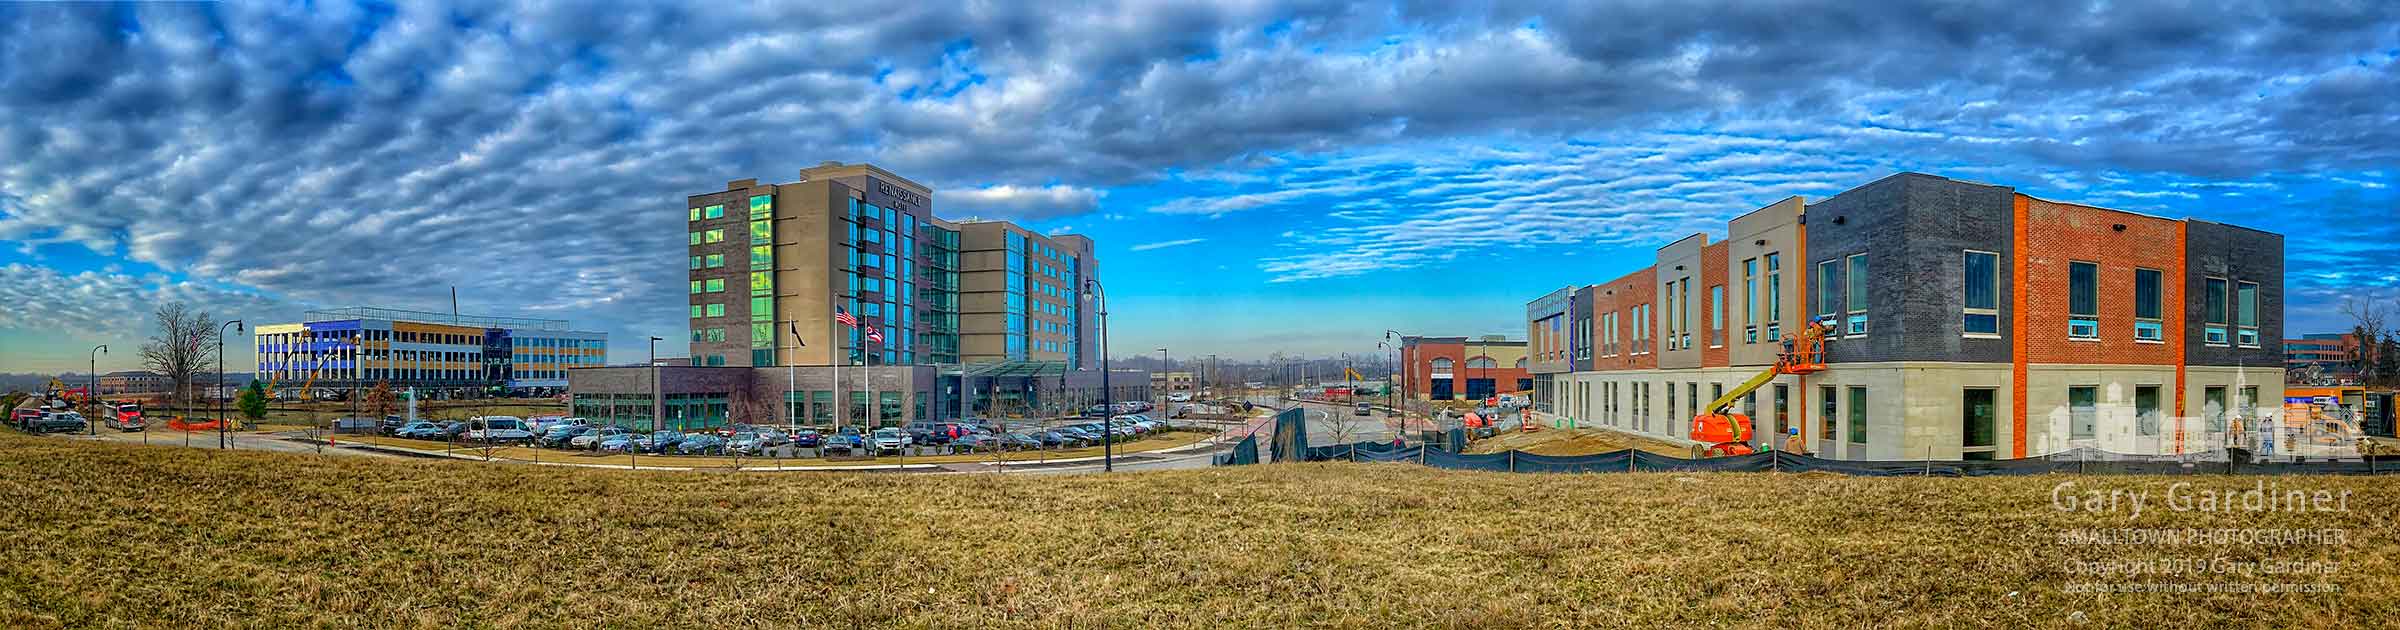 A panorama photo shows, from left, the DHL headquarters building under construction, the Renaissance Hotel, and a medical building and a coworking space, both also under construction at Westar in north Westerville. My Final Photo for Feb. 27, 2019.